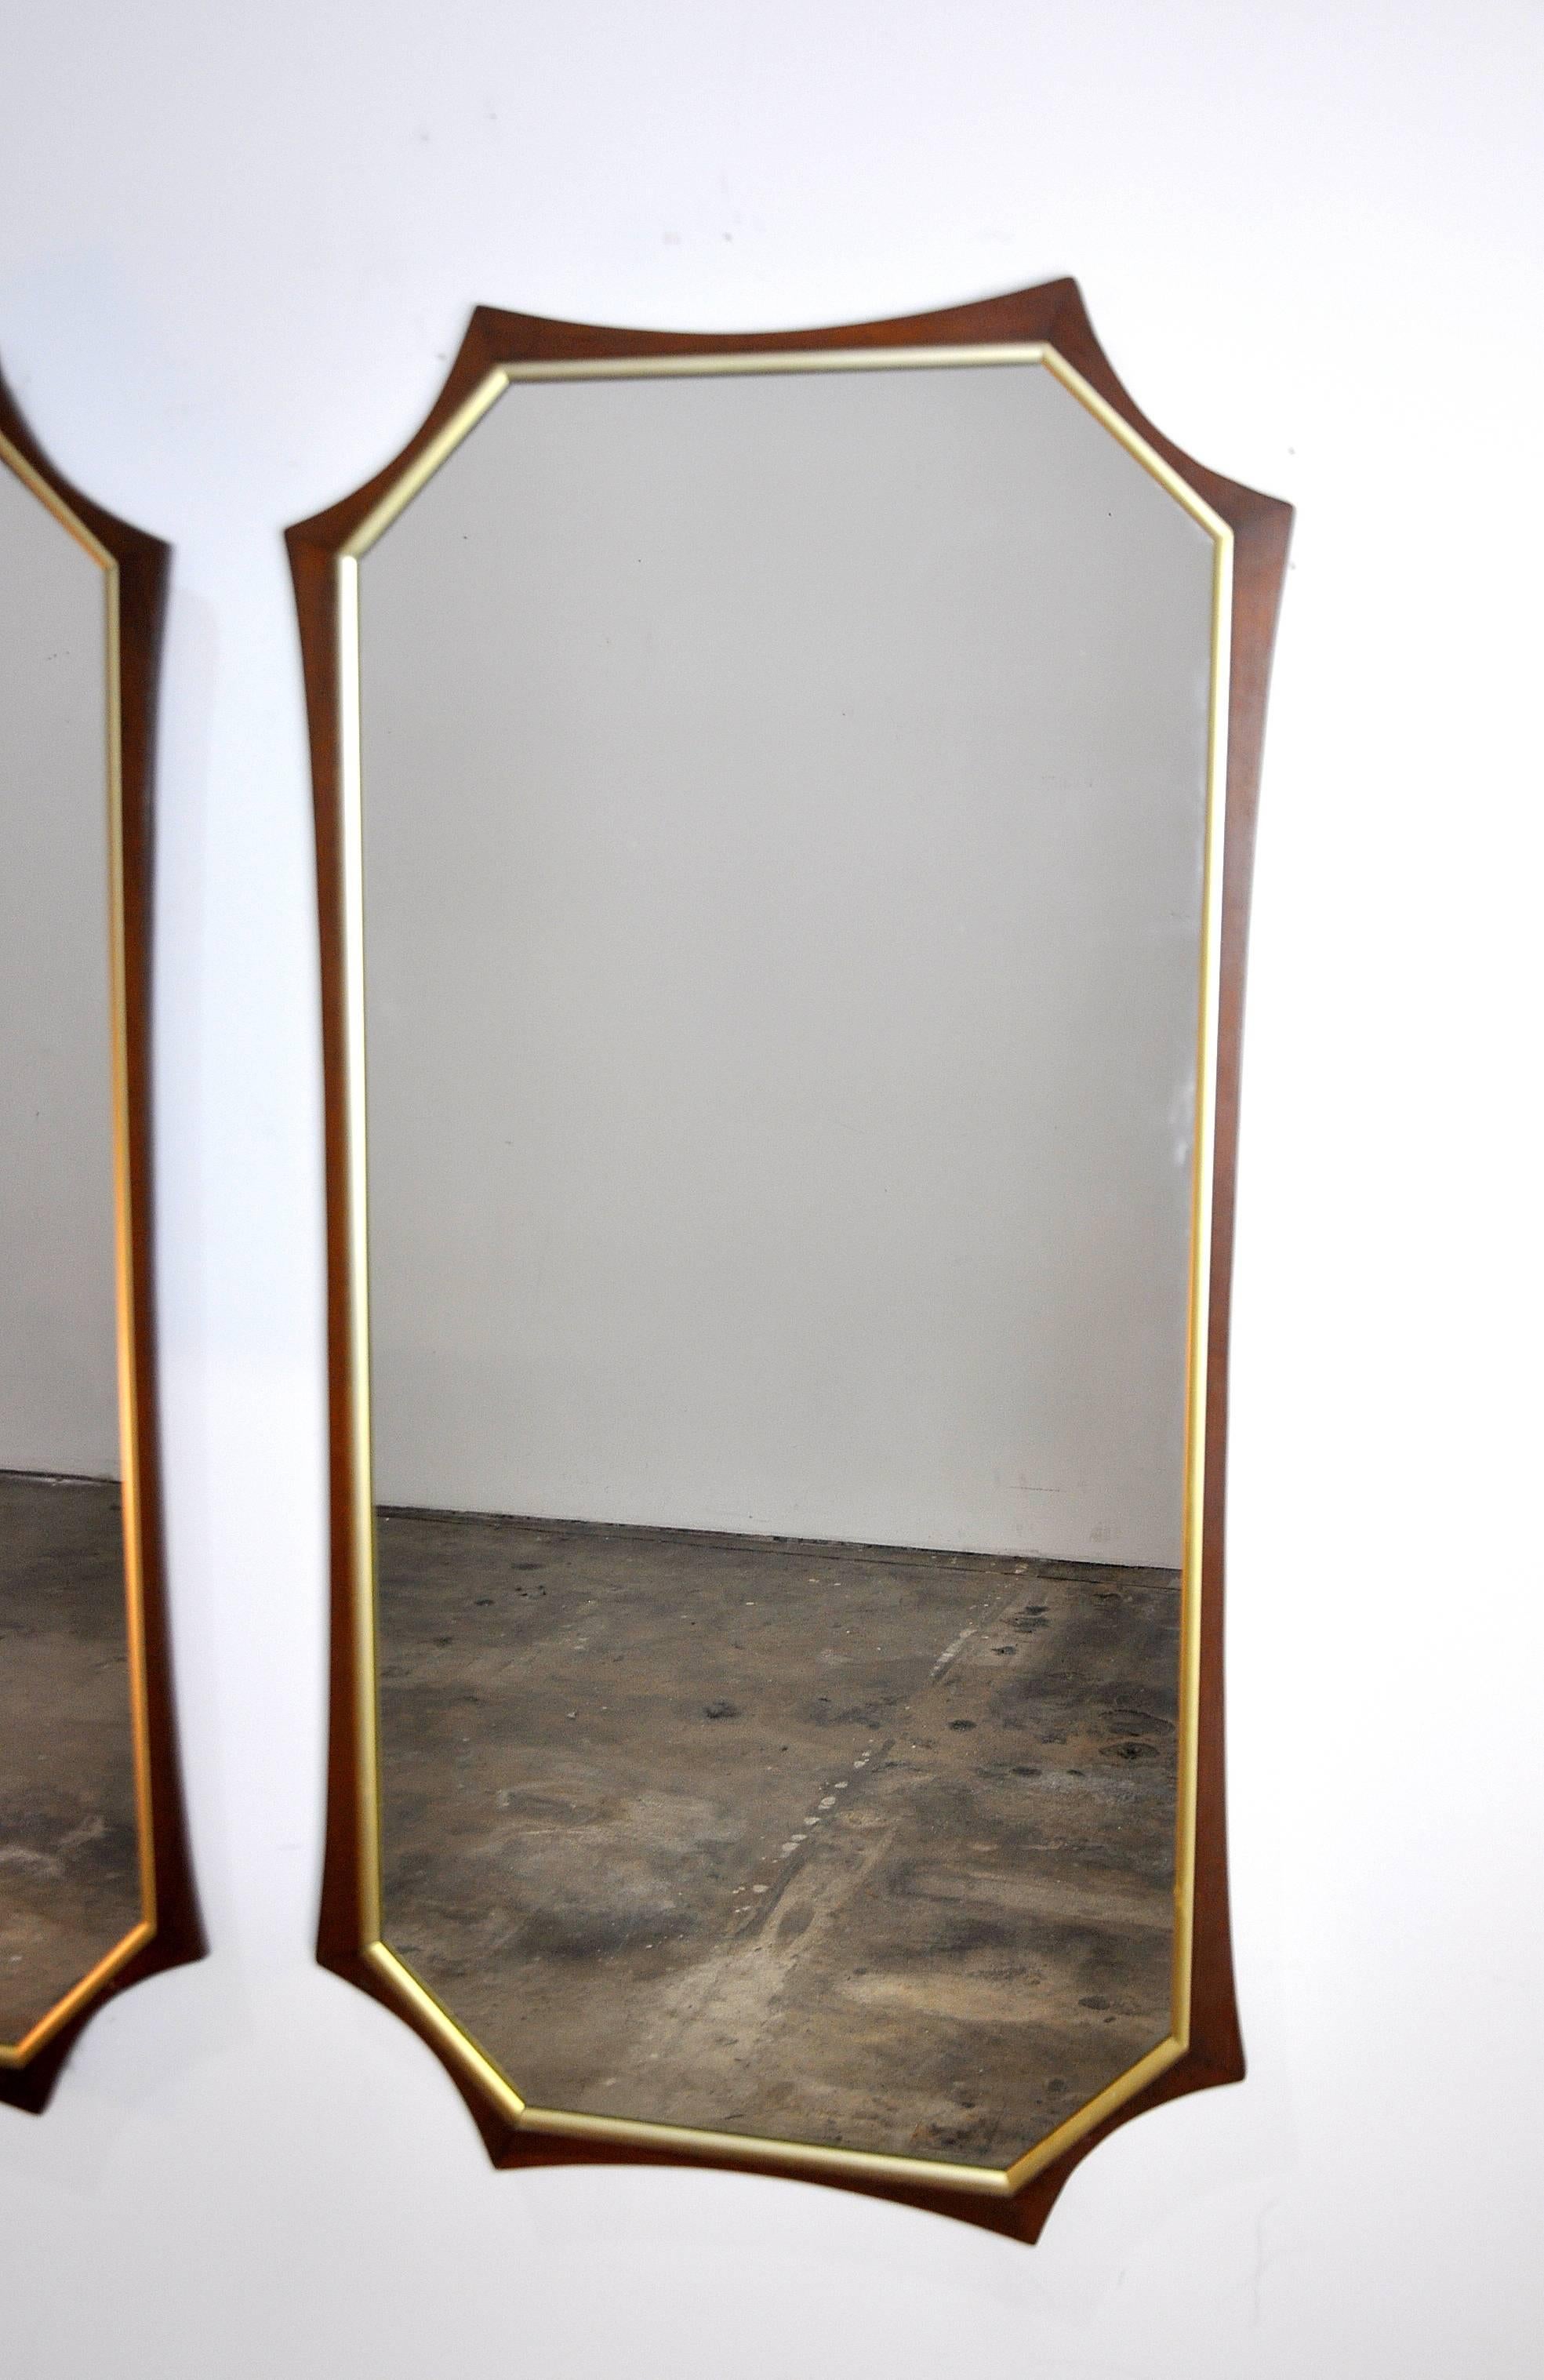 An eye-catching pair of vintage Mid-Century mirrors dating from the 1960s. Each large mirror features an octagonal walnut frame with brass toned trim. A unique find that will instantly decorate any room.